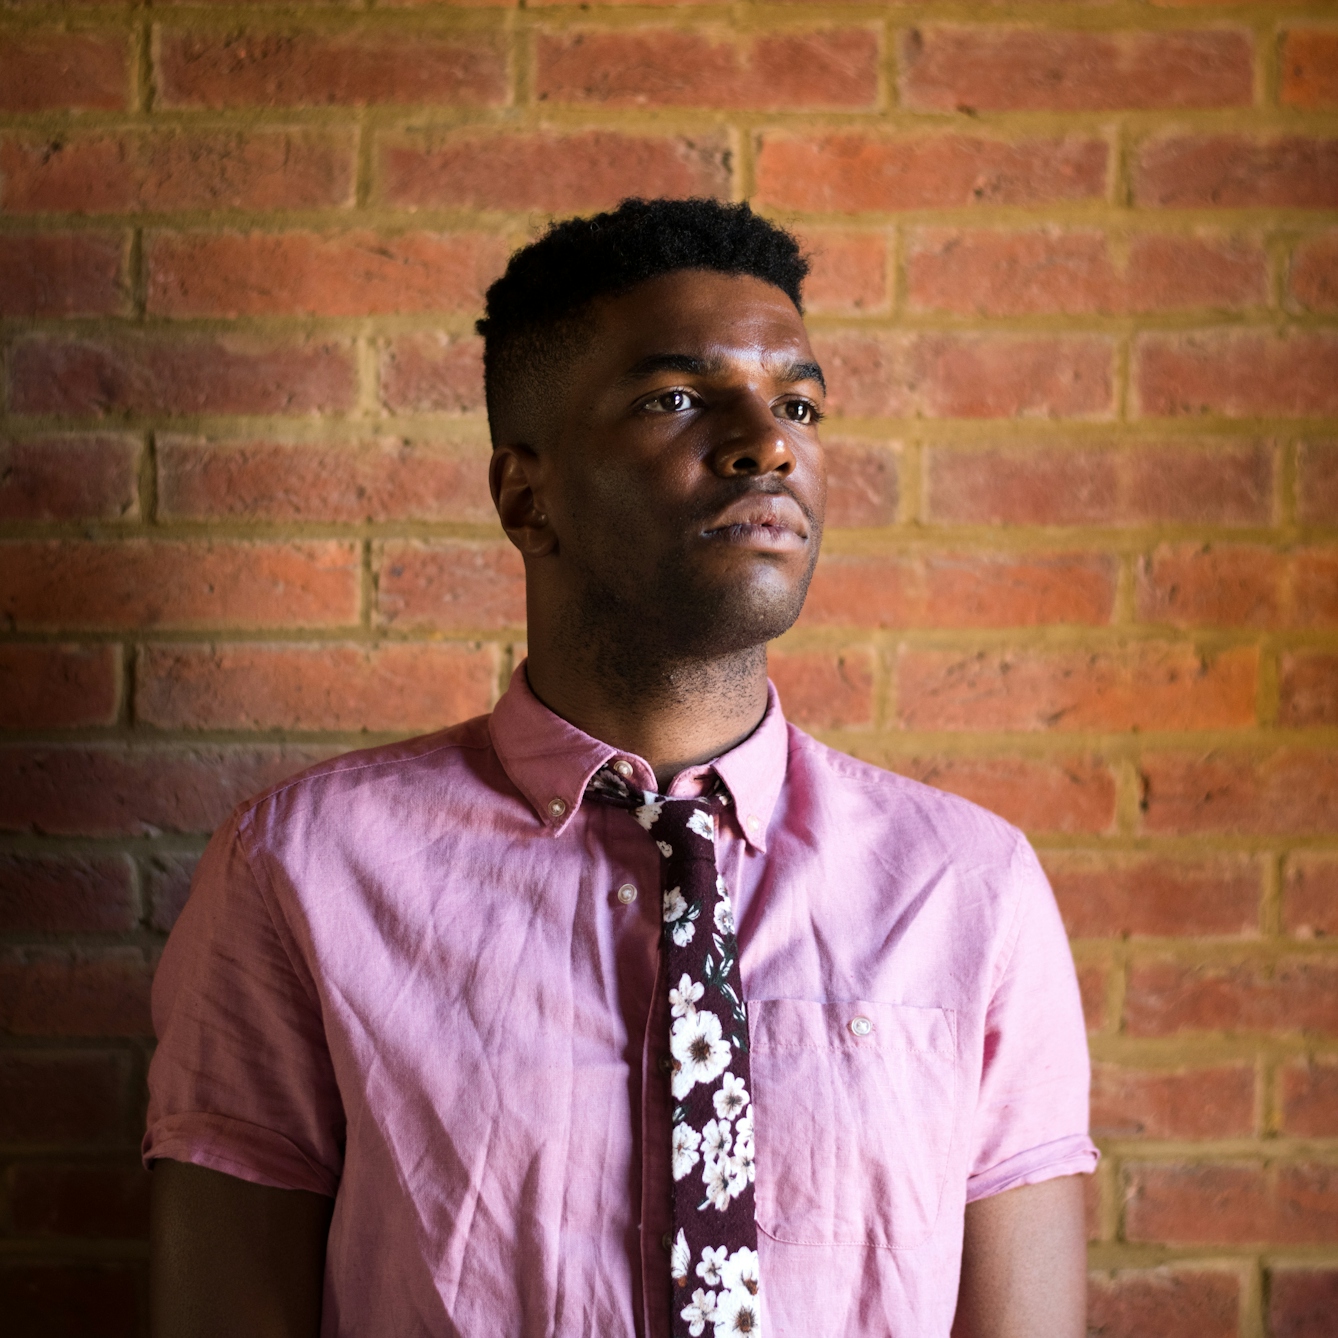 Photograph of a man wearing a pink shirt and floral tie standing in front of a red brick wall, look off camera into the distance.